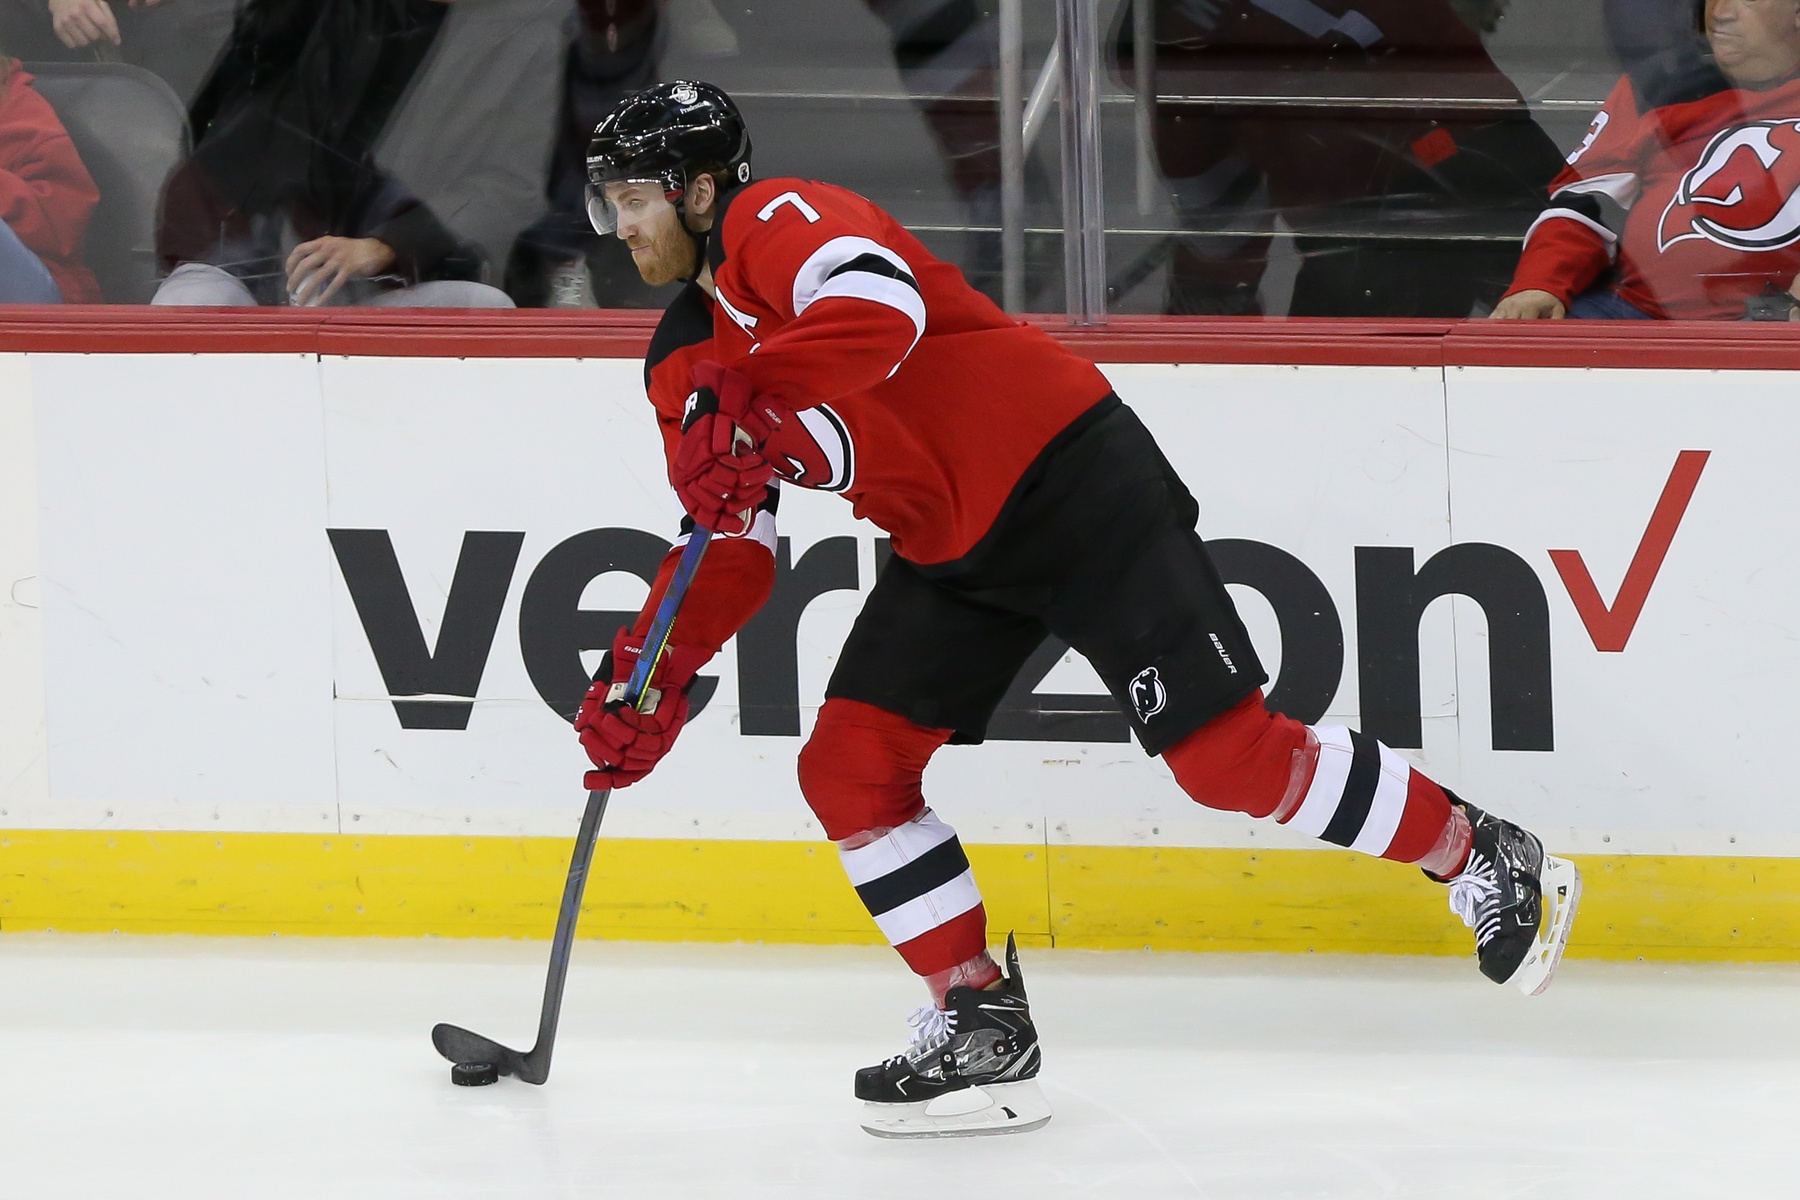 Game Preview: New Jersey Devils vs. New York Islanders - All